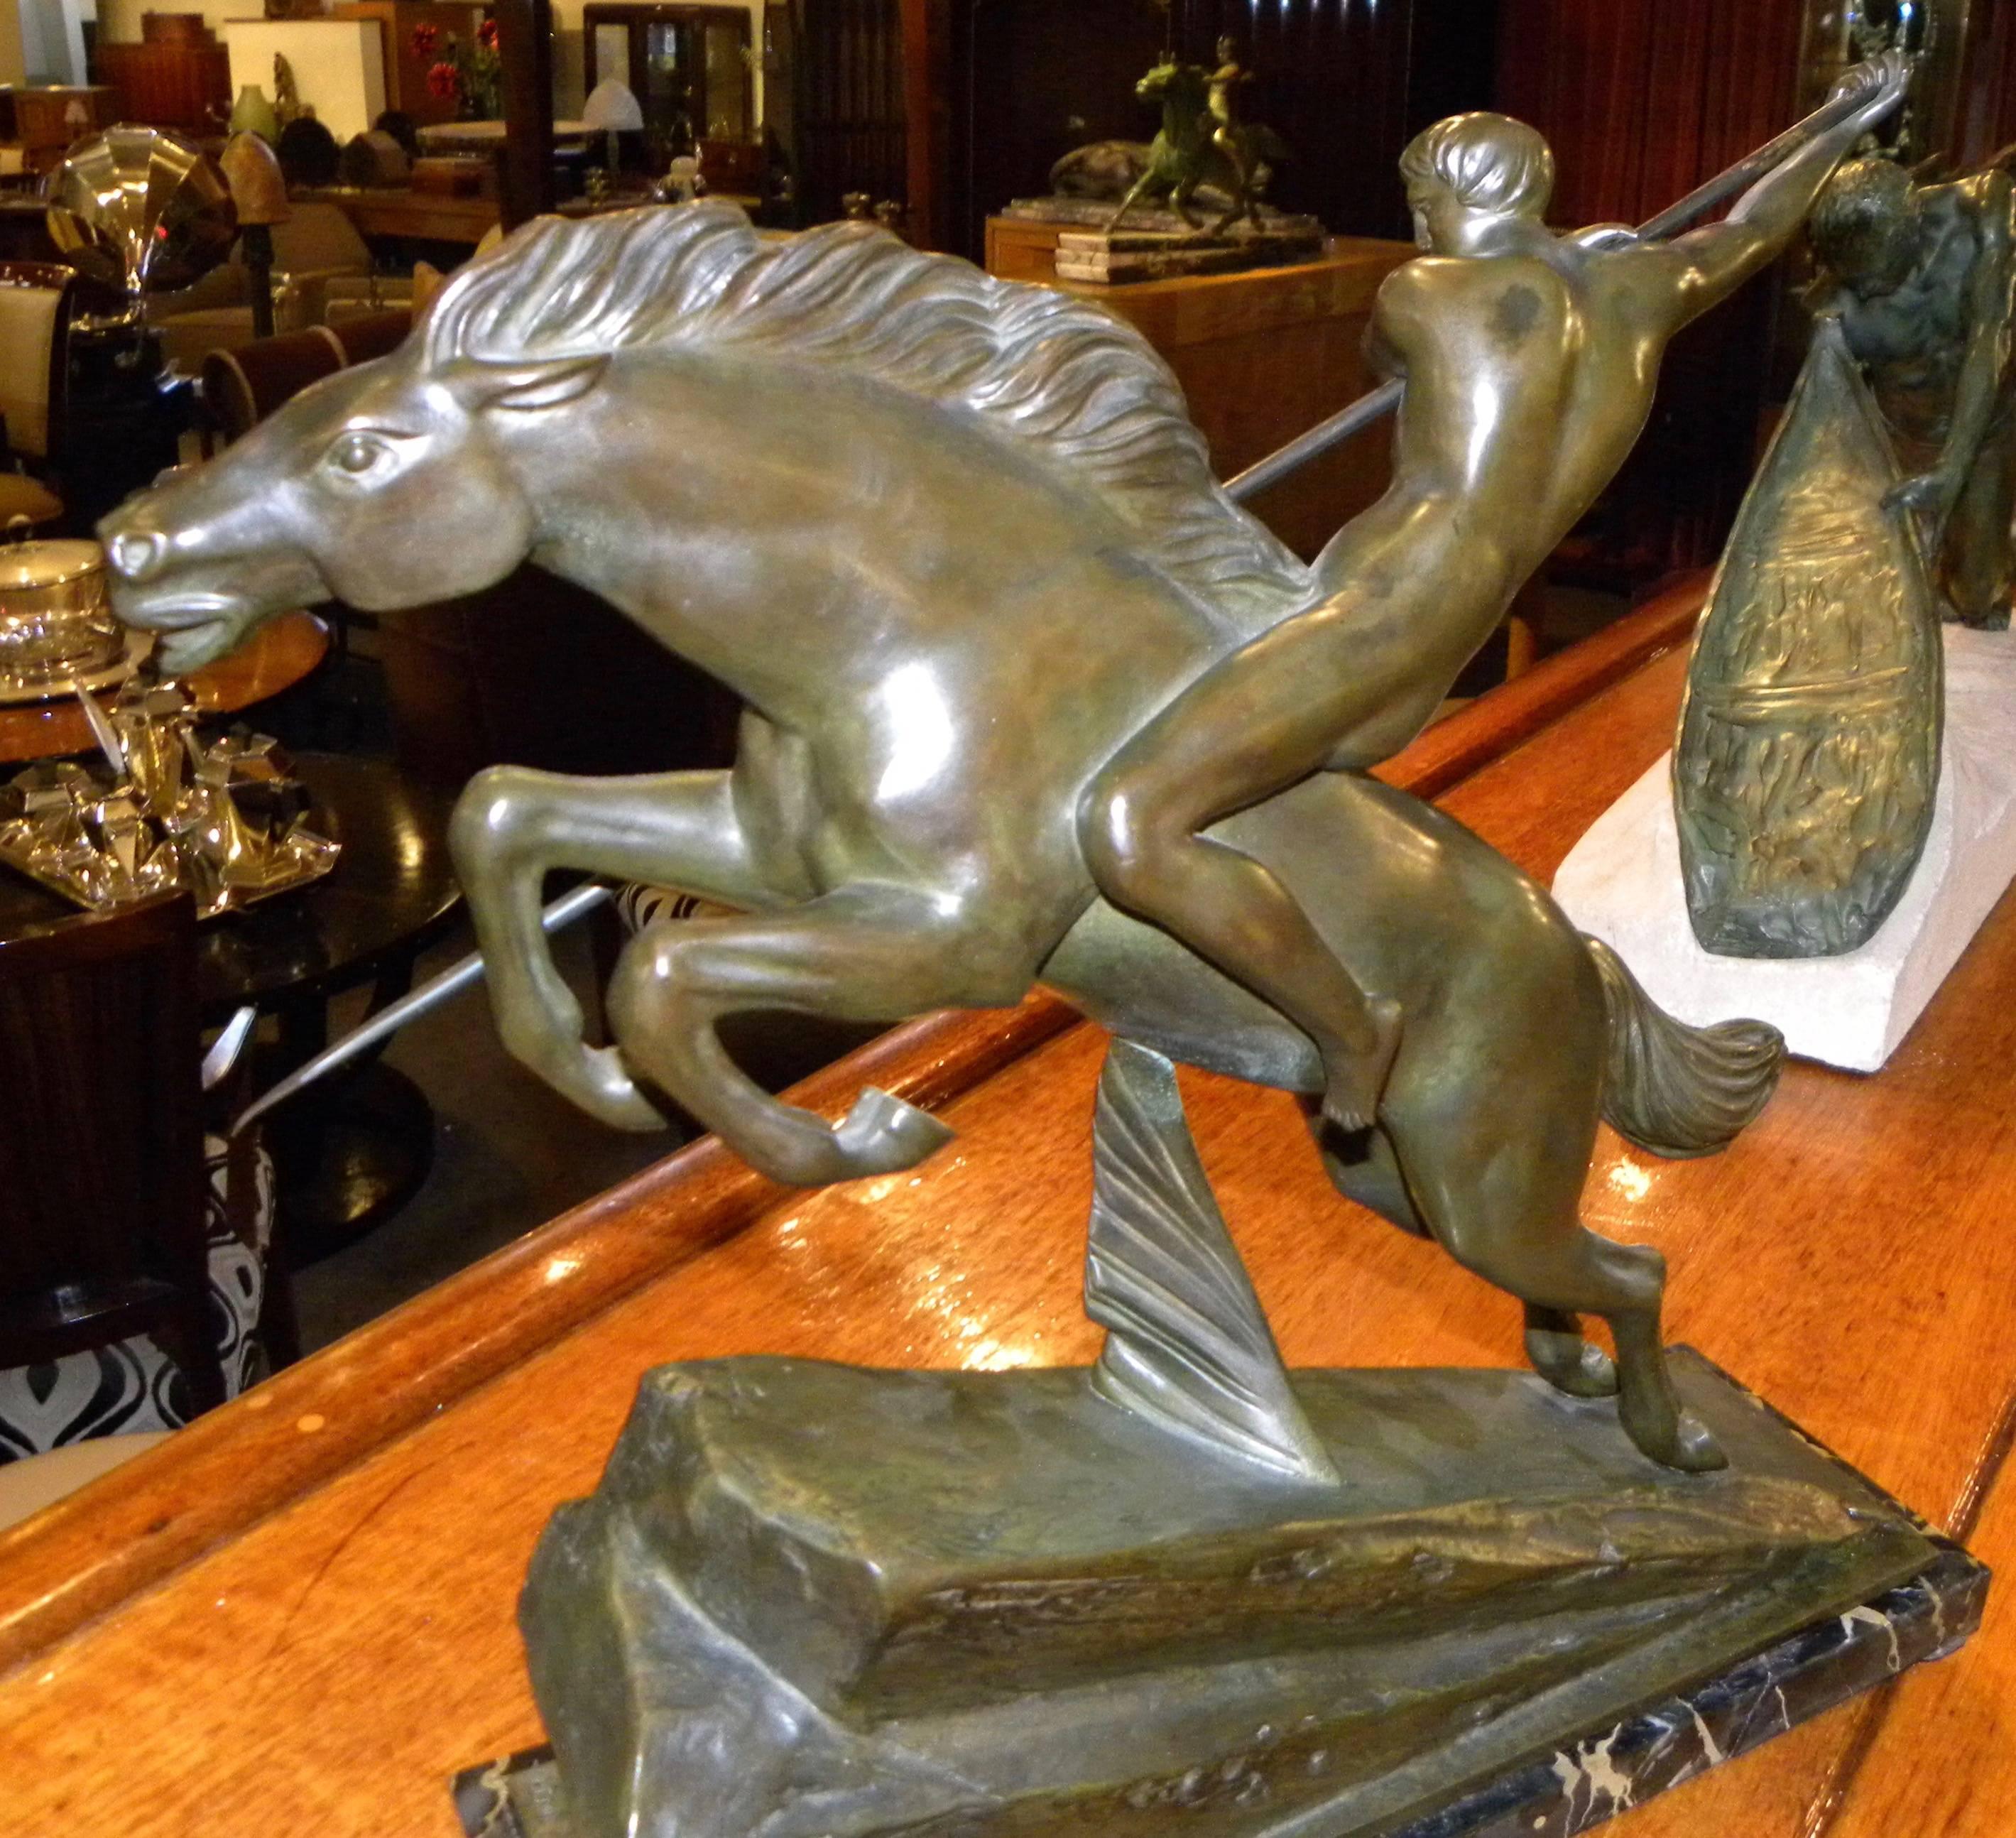 An Art Deco bronze by French sculptor Armand Lemo that captures the essence of speed, power and strength in both the galloping horse and the warrior.

So many things make this statue a Classic: The singular spear being used as a focal point, the